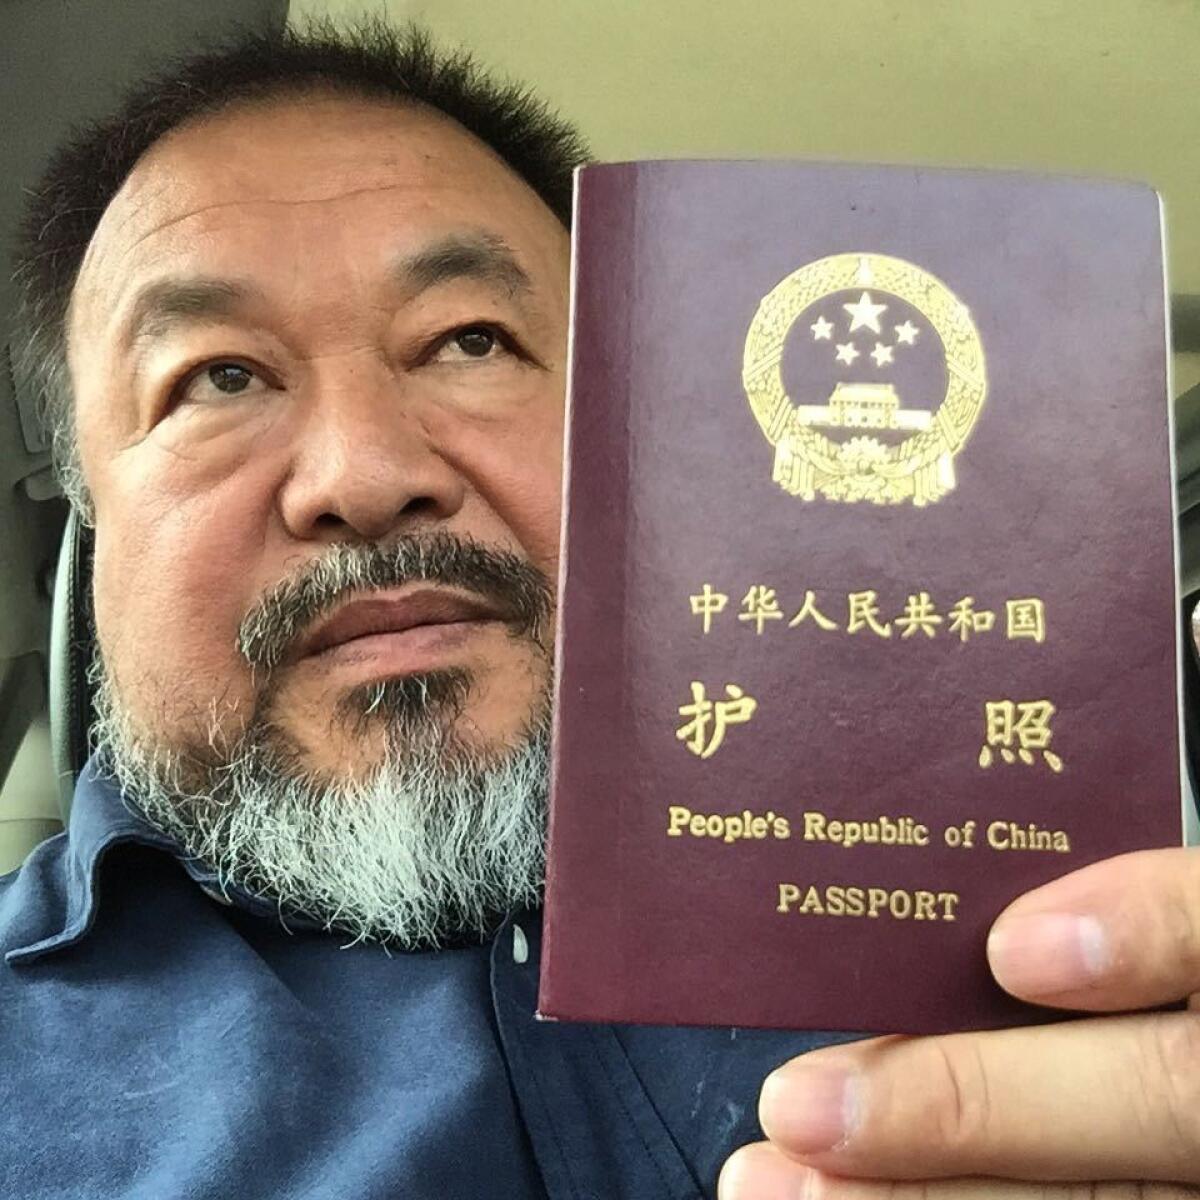 Artist Ai Weiwei, whose passport had been held by Chinese authorities for years, posted this photo on social media on July 22.